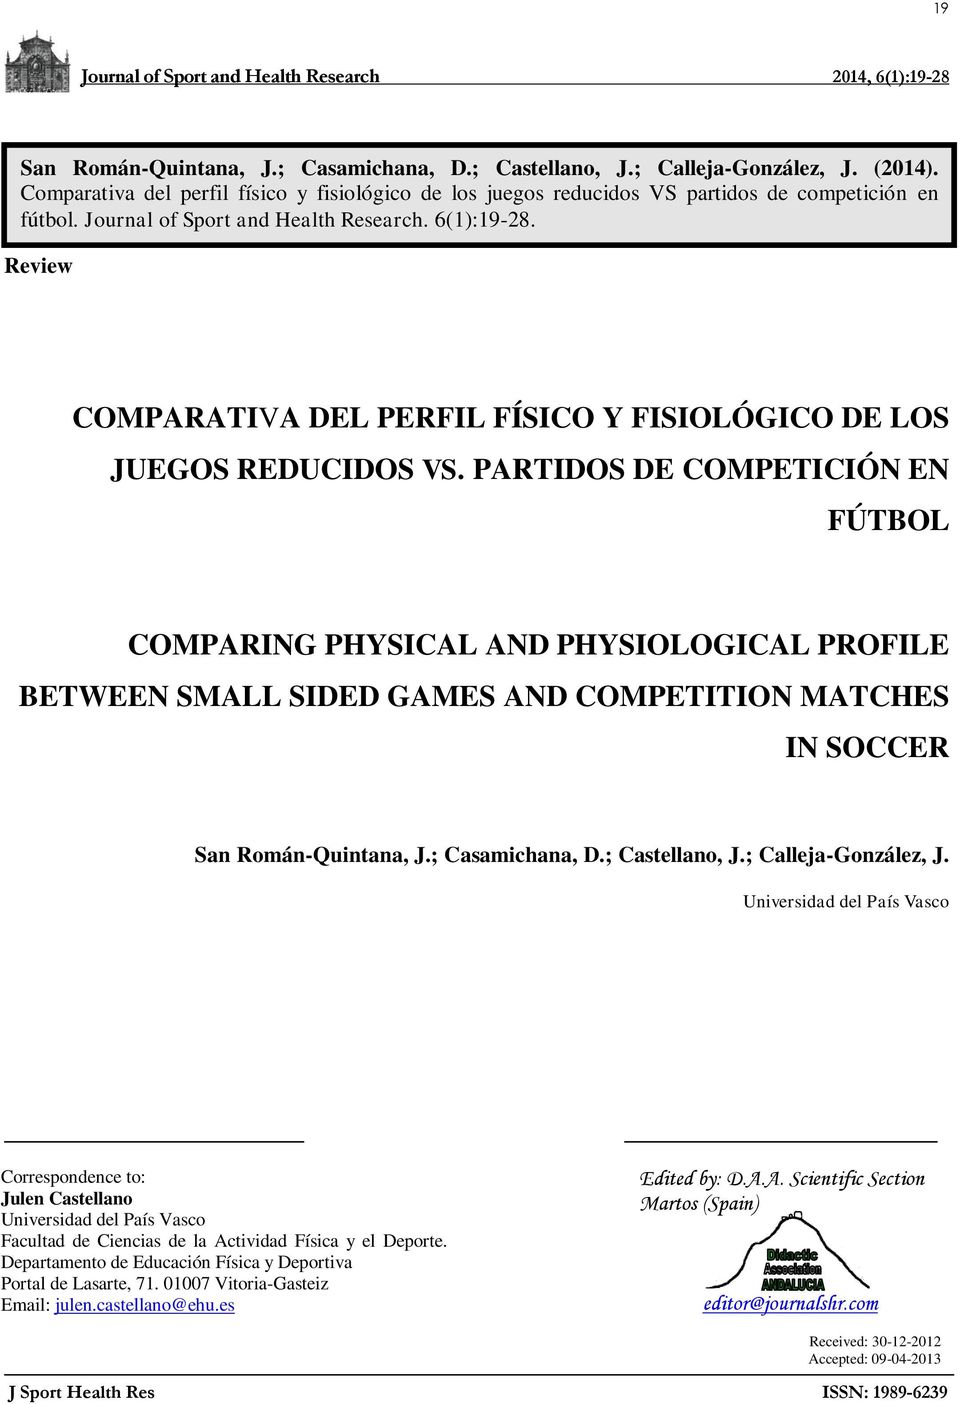 PARTIDOS DE COMPETICIÓN EN FÚTBOL COMPARING PHYSICAL AND PHYSIOLOGICAL PROFILE BETWEEN SMALL SIDED GAMES AND COMPETITION MATCHES IN SOCCER San Román-Quintana, J.; Casamichana, D.; Castellano, J.